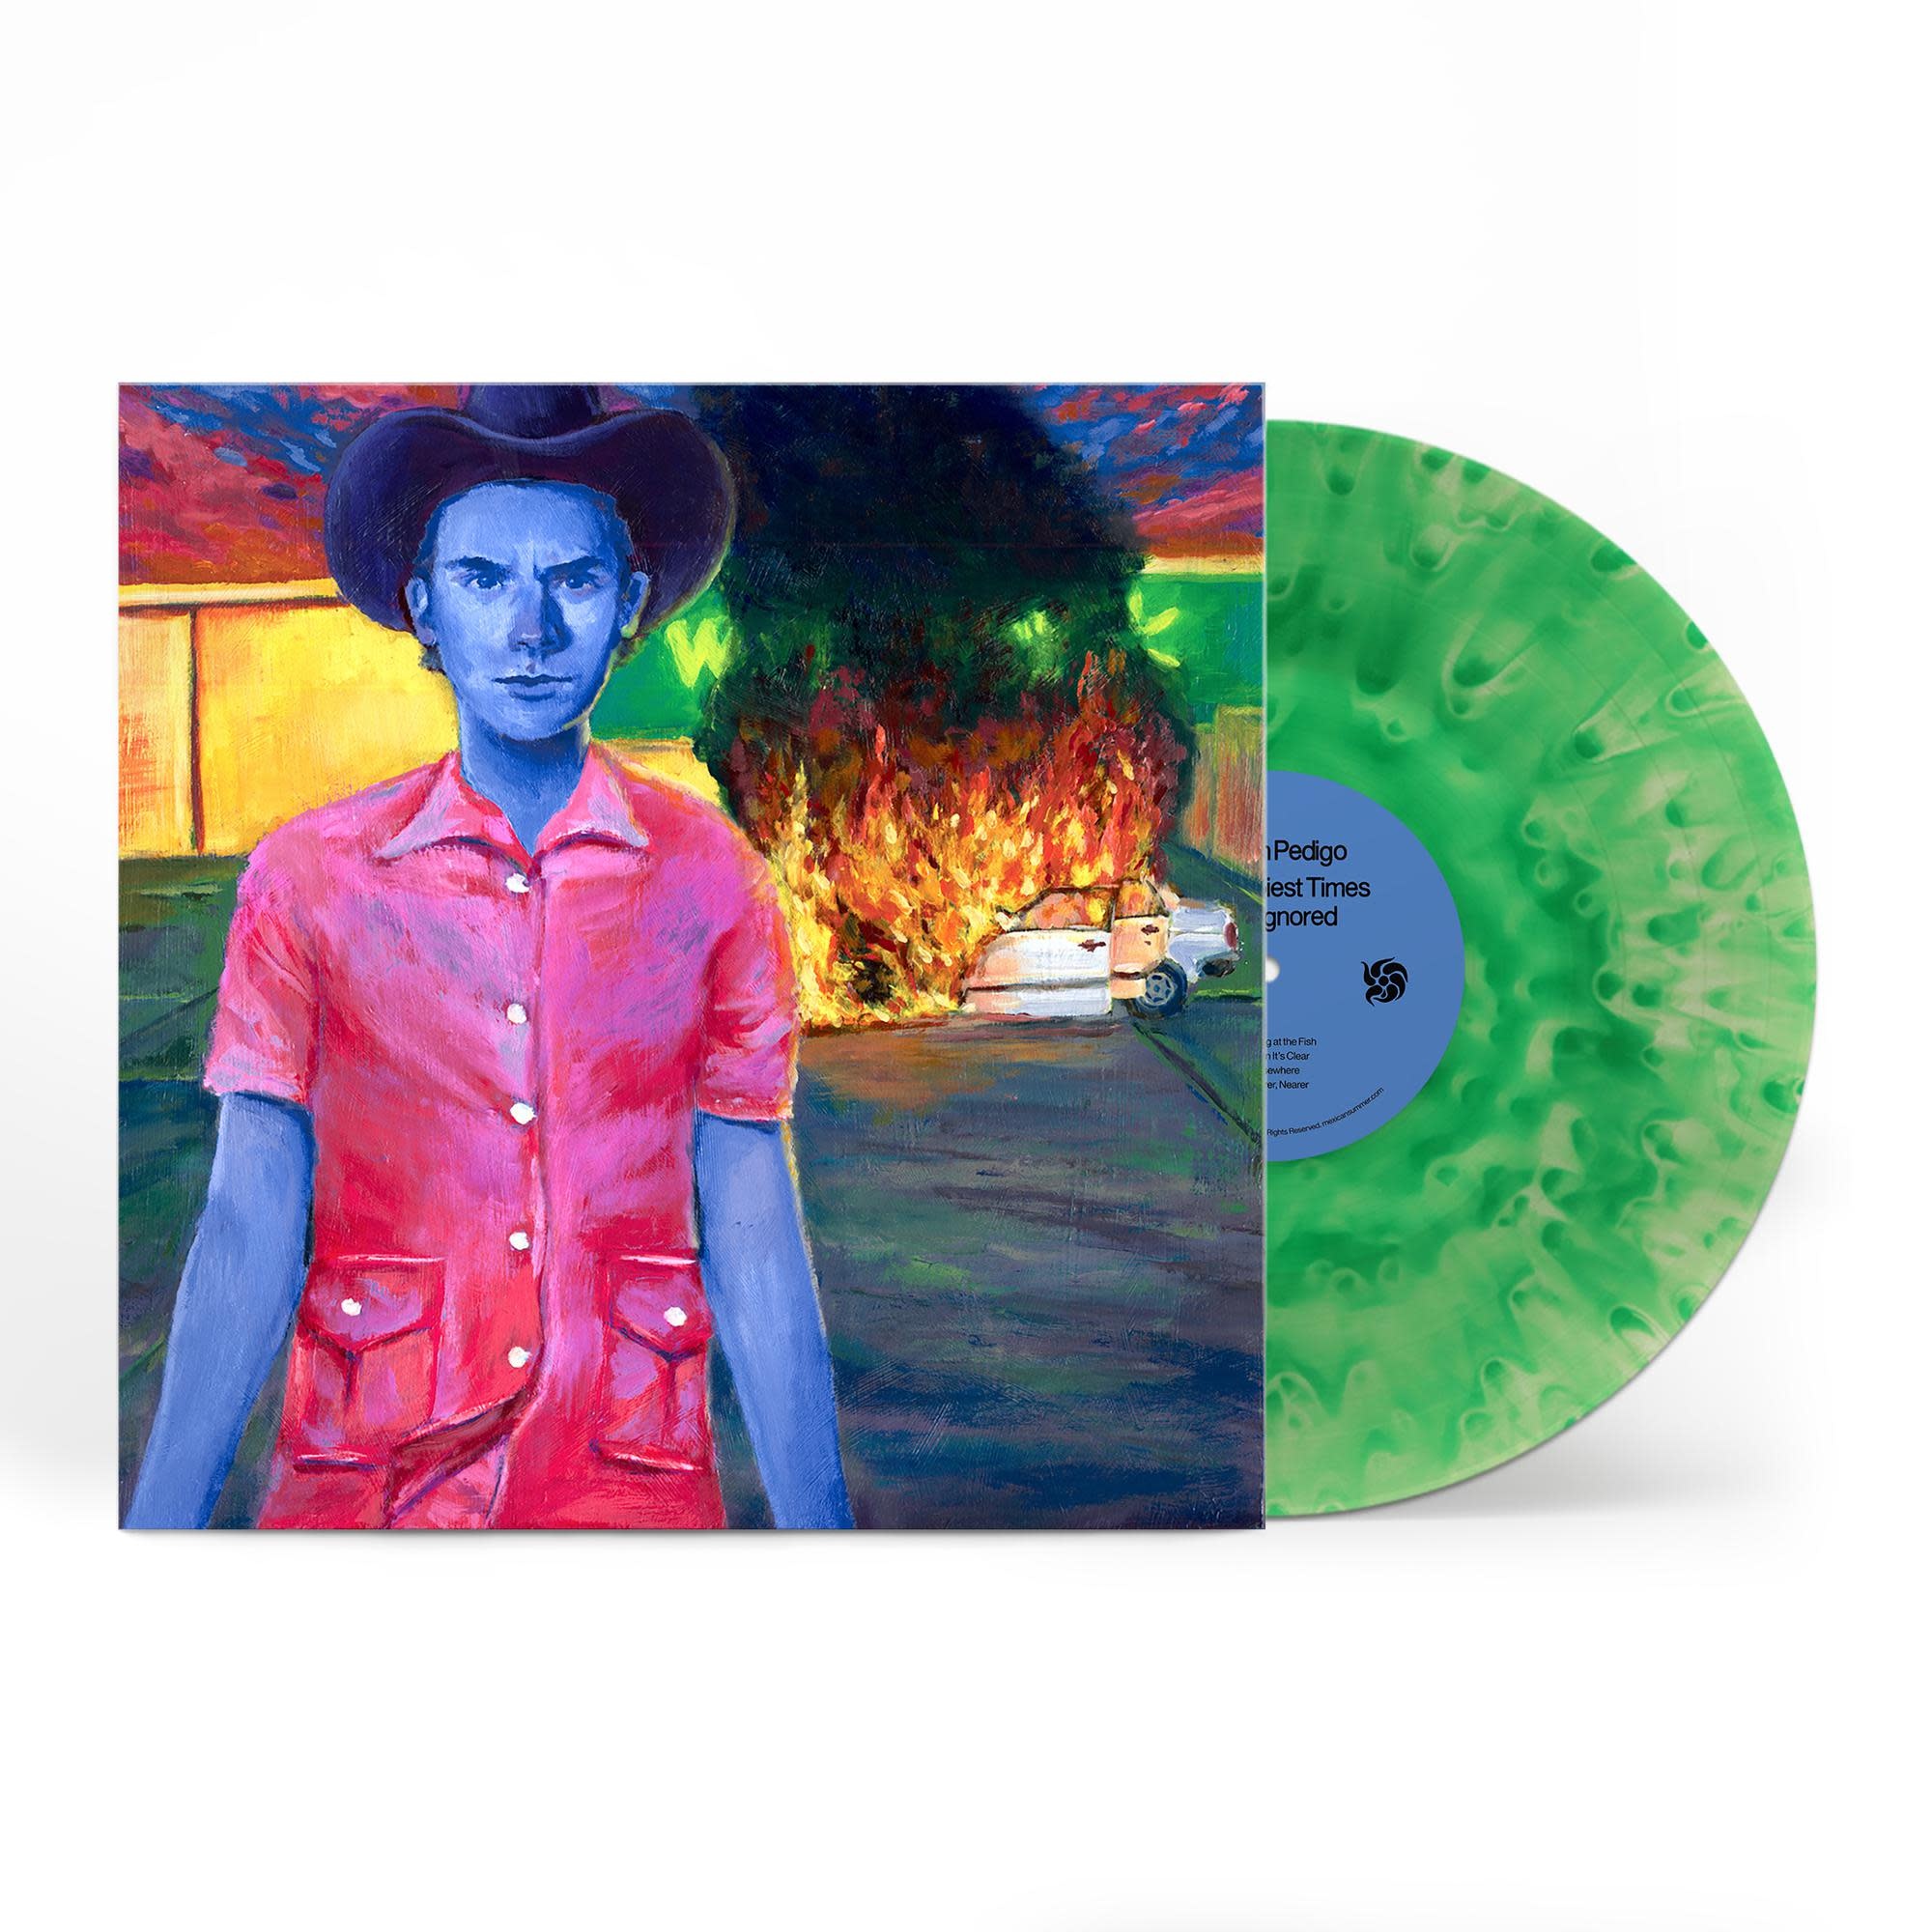 Mexican Summer (SIGNED) Hayden Pedigo - The Happiest Times I Ever Ignored (Green Vinyl) w/PROMO Bowling Pin